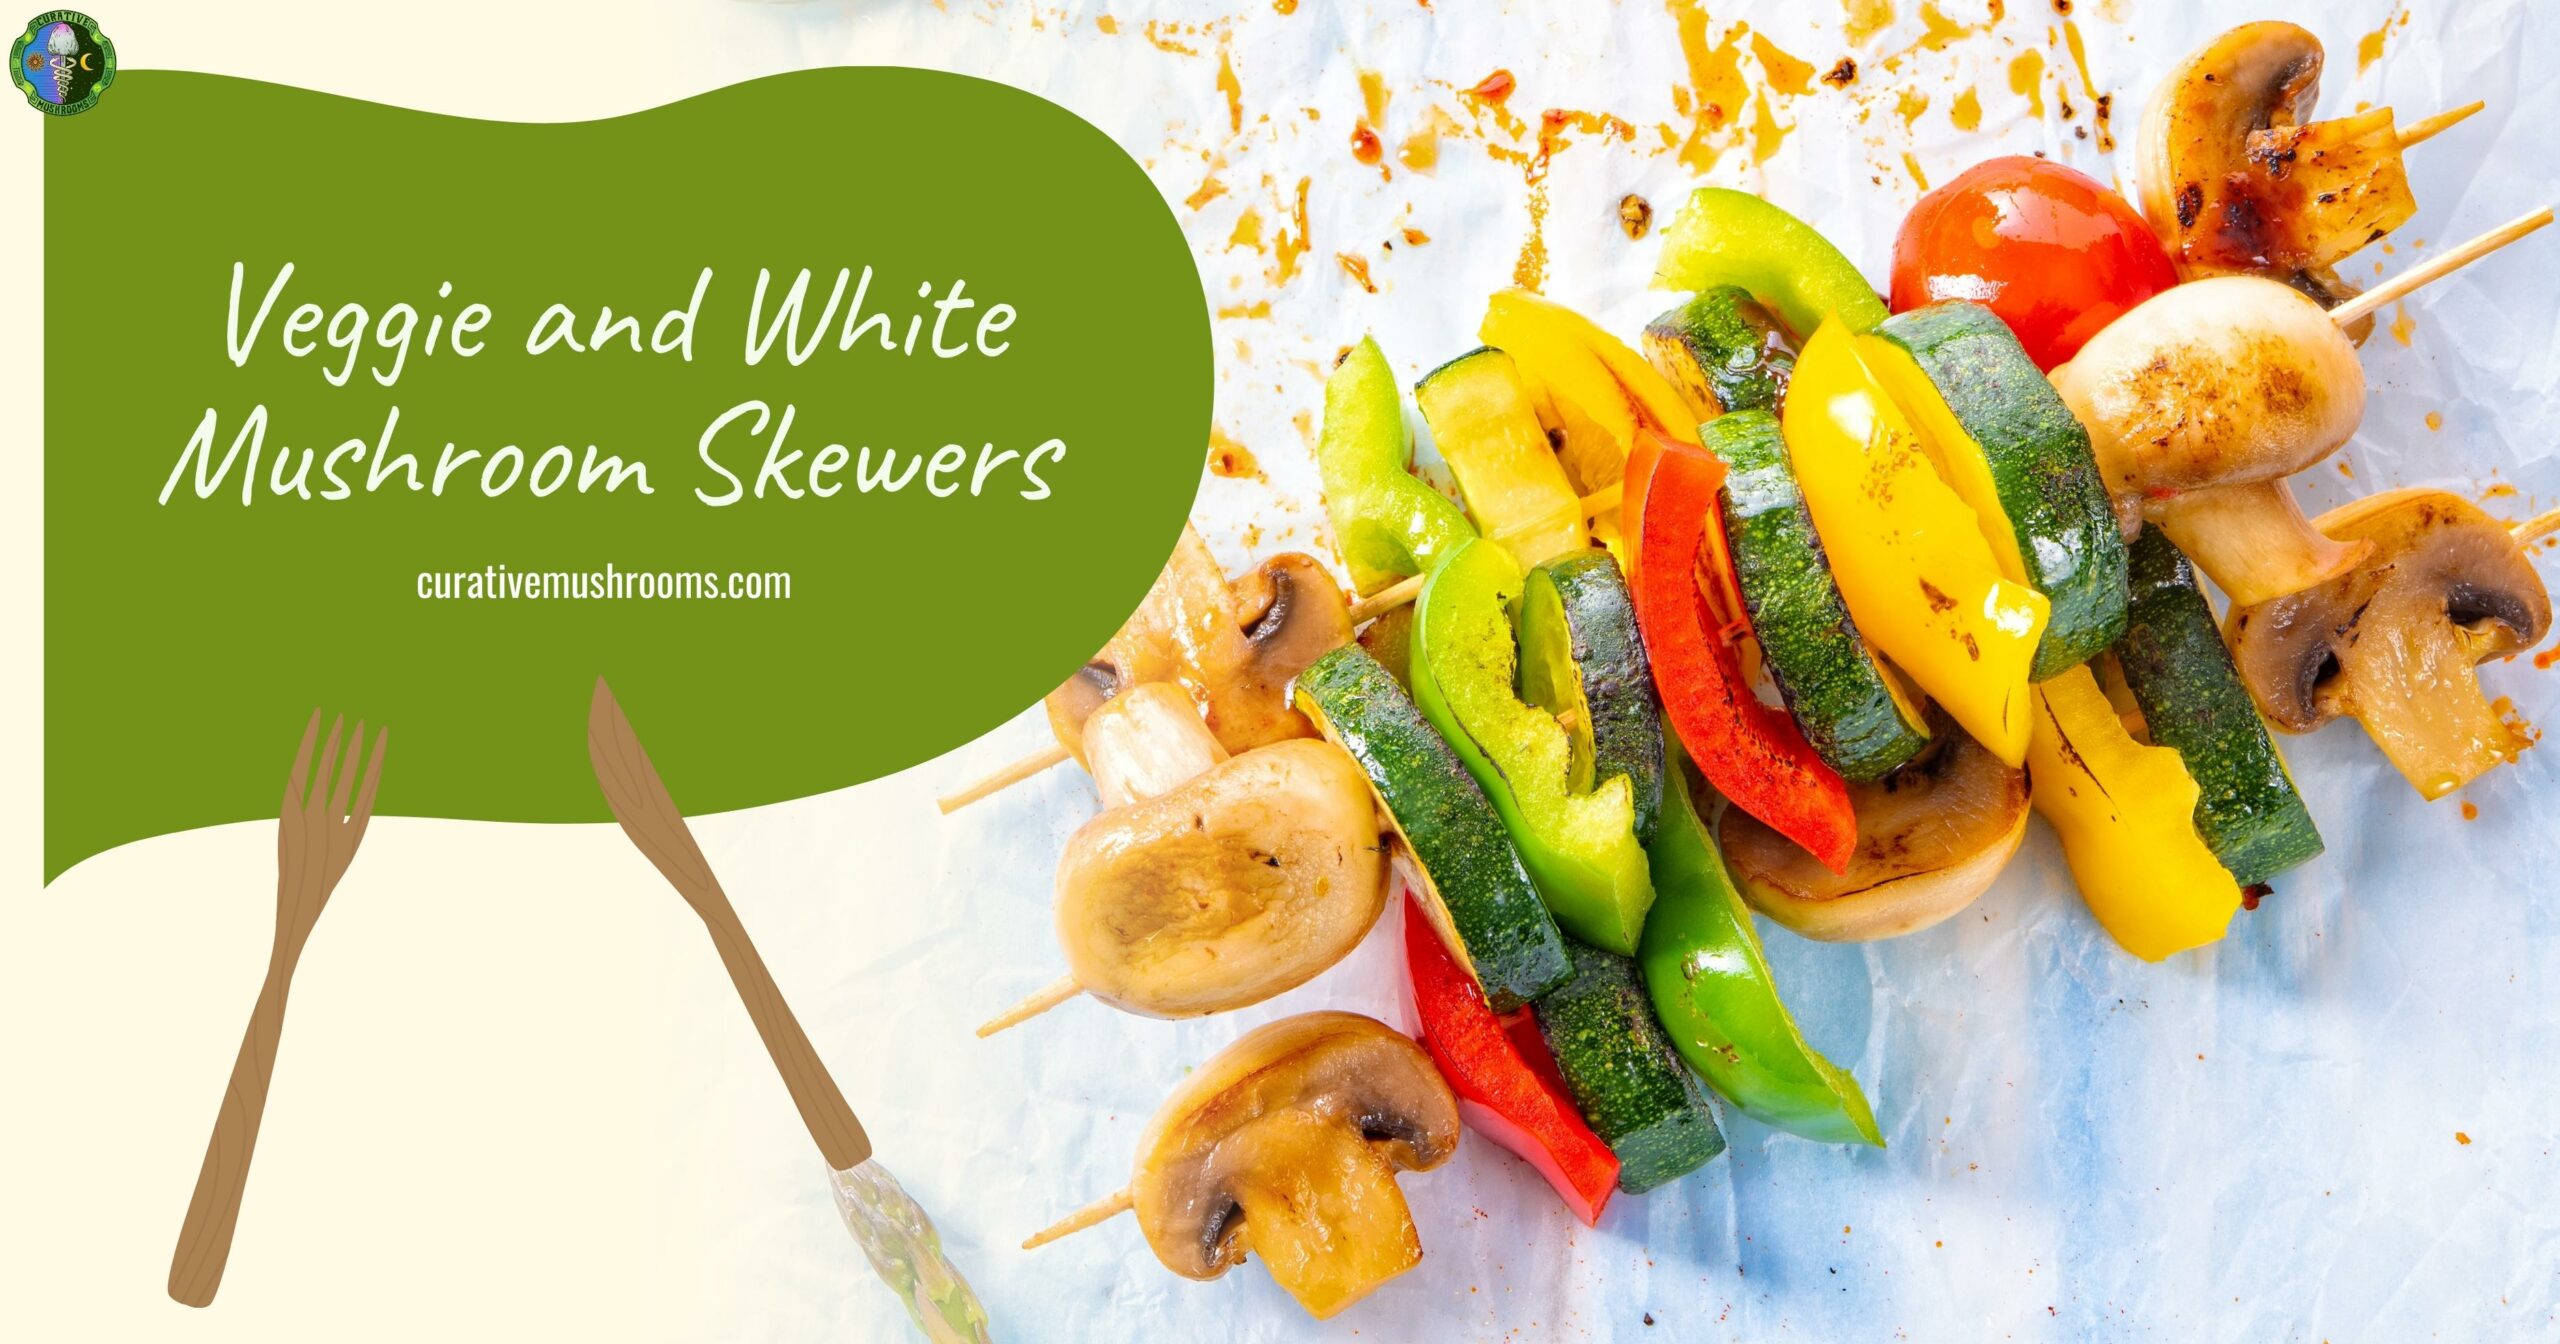 Veggie and White Button Mushroom Skewers with zucchini, bell pepper, and barbecue sauce